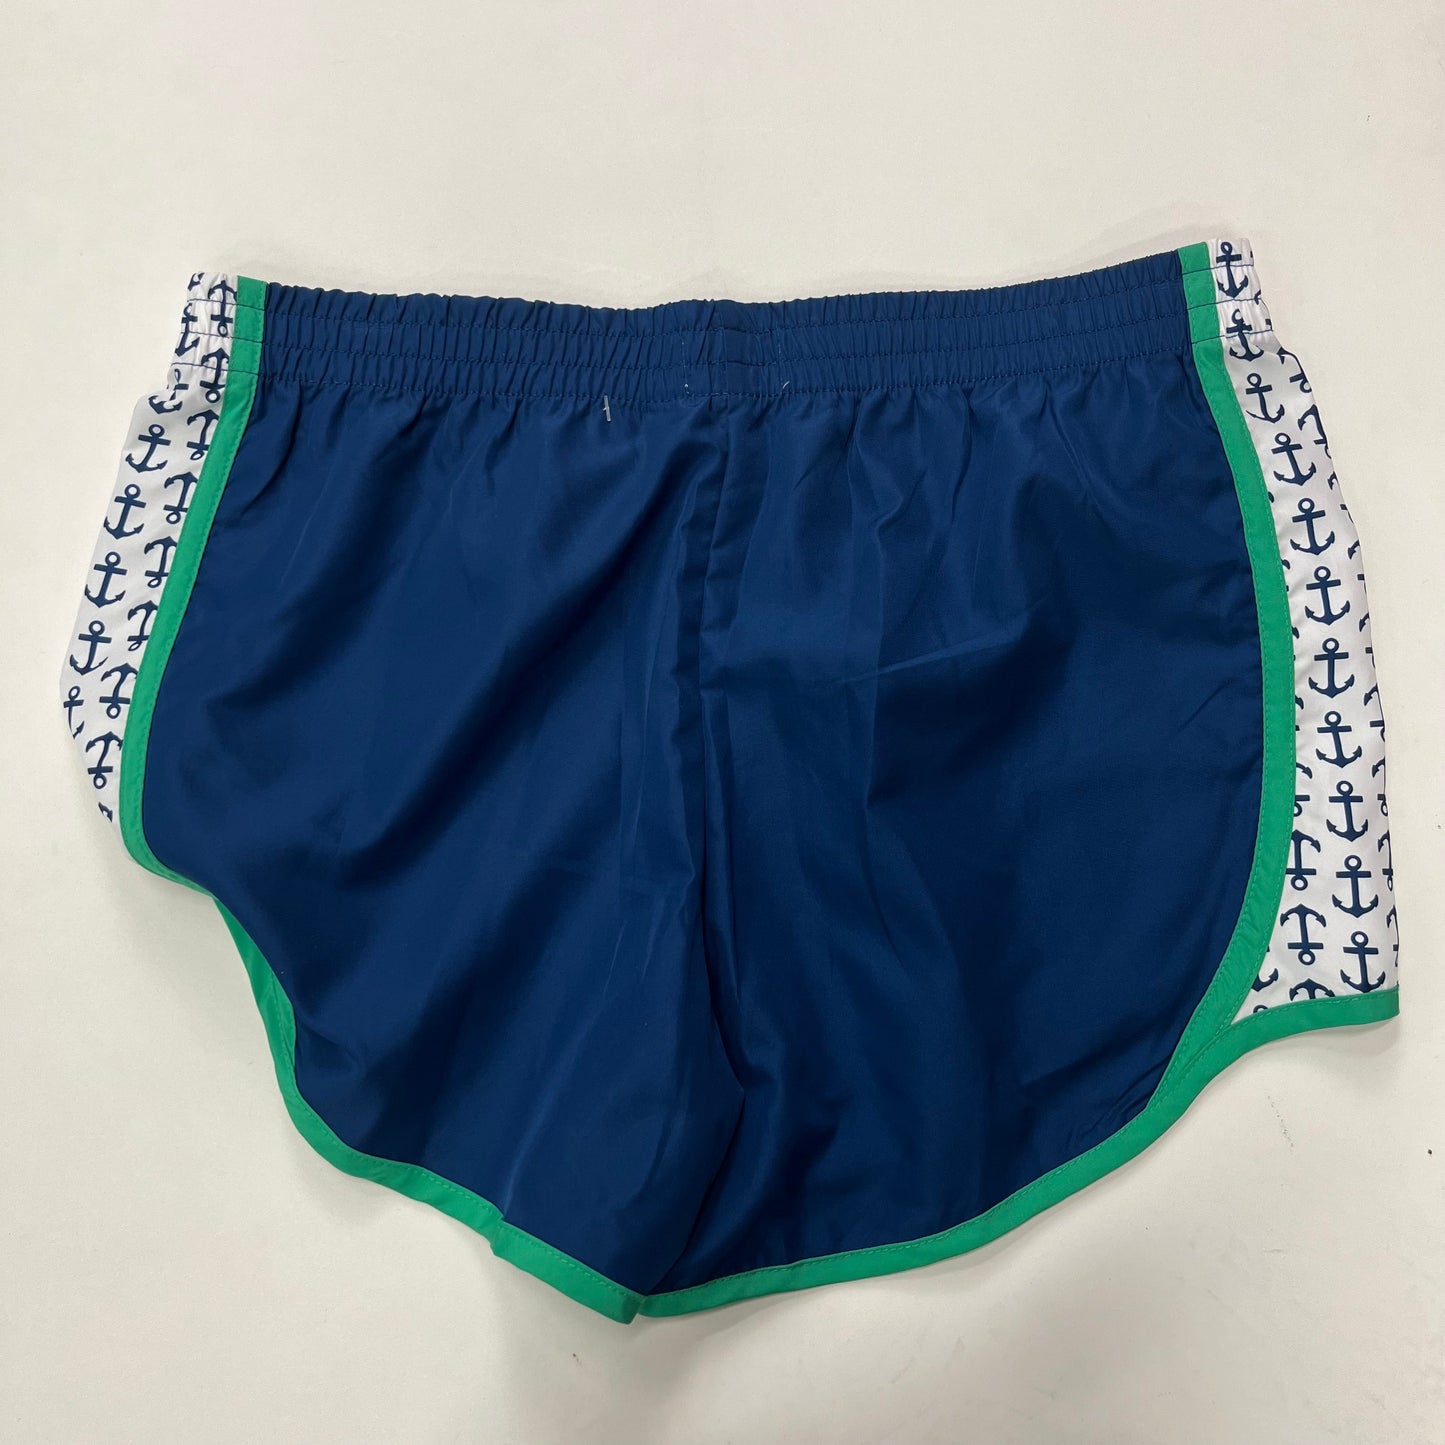 Athletic Shorts By Mudpie NWT  Size: S